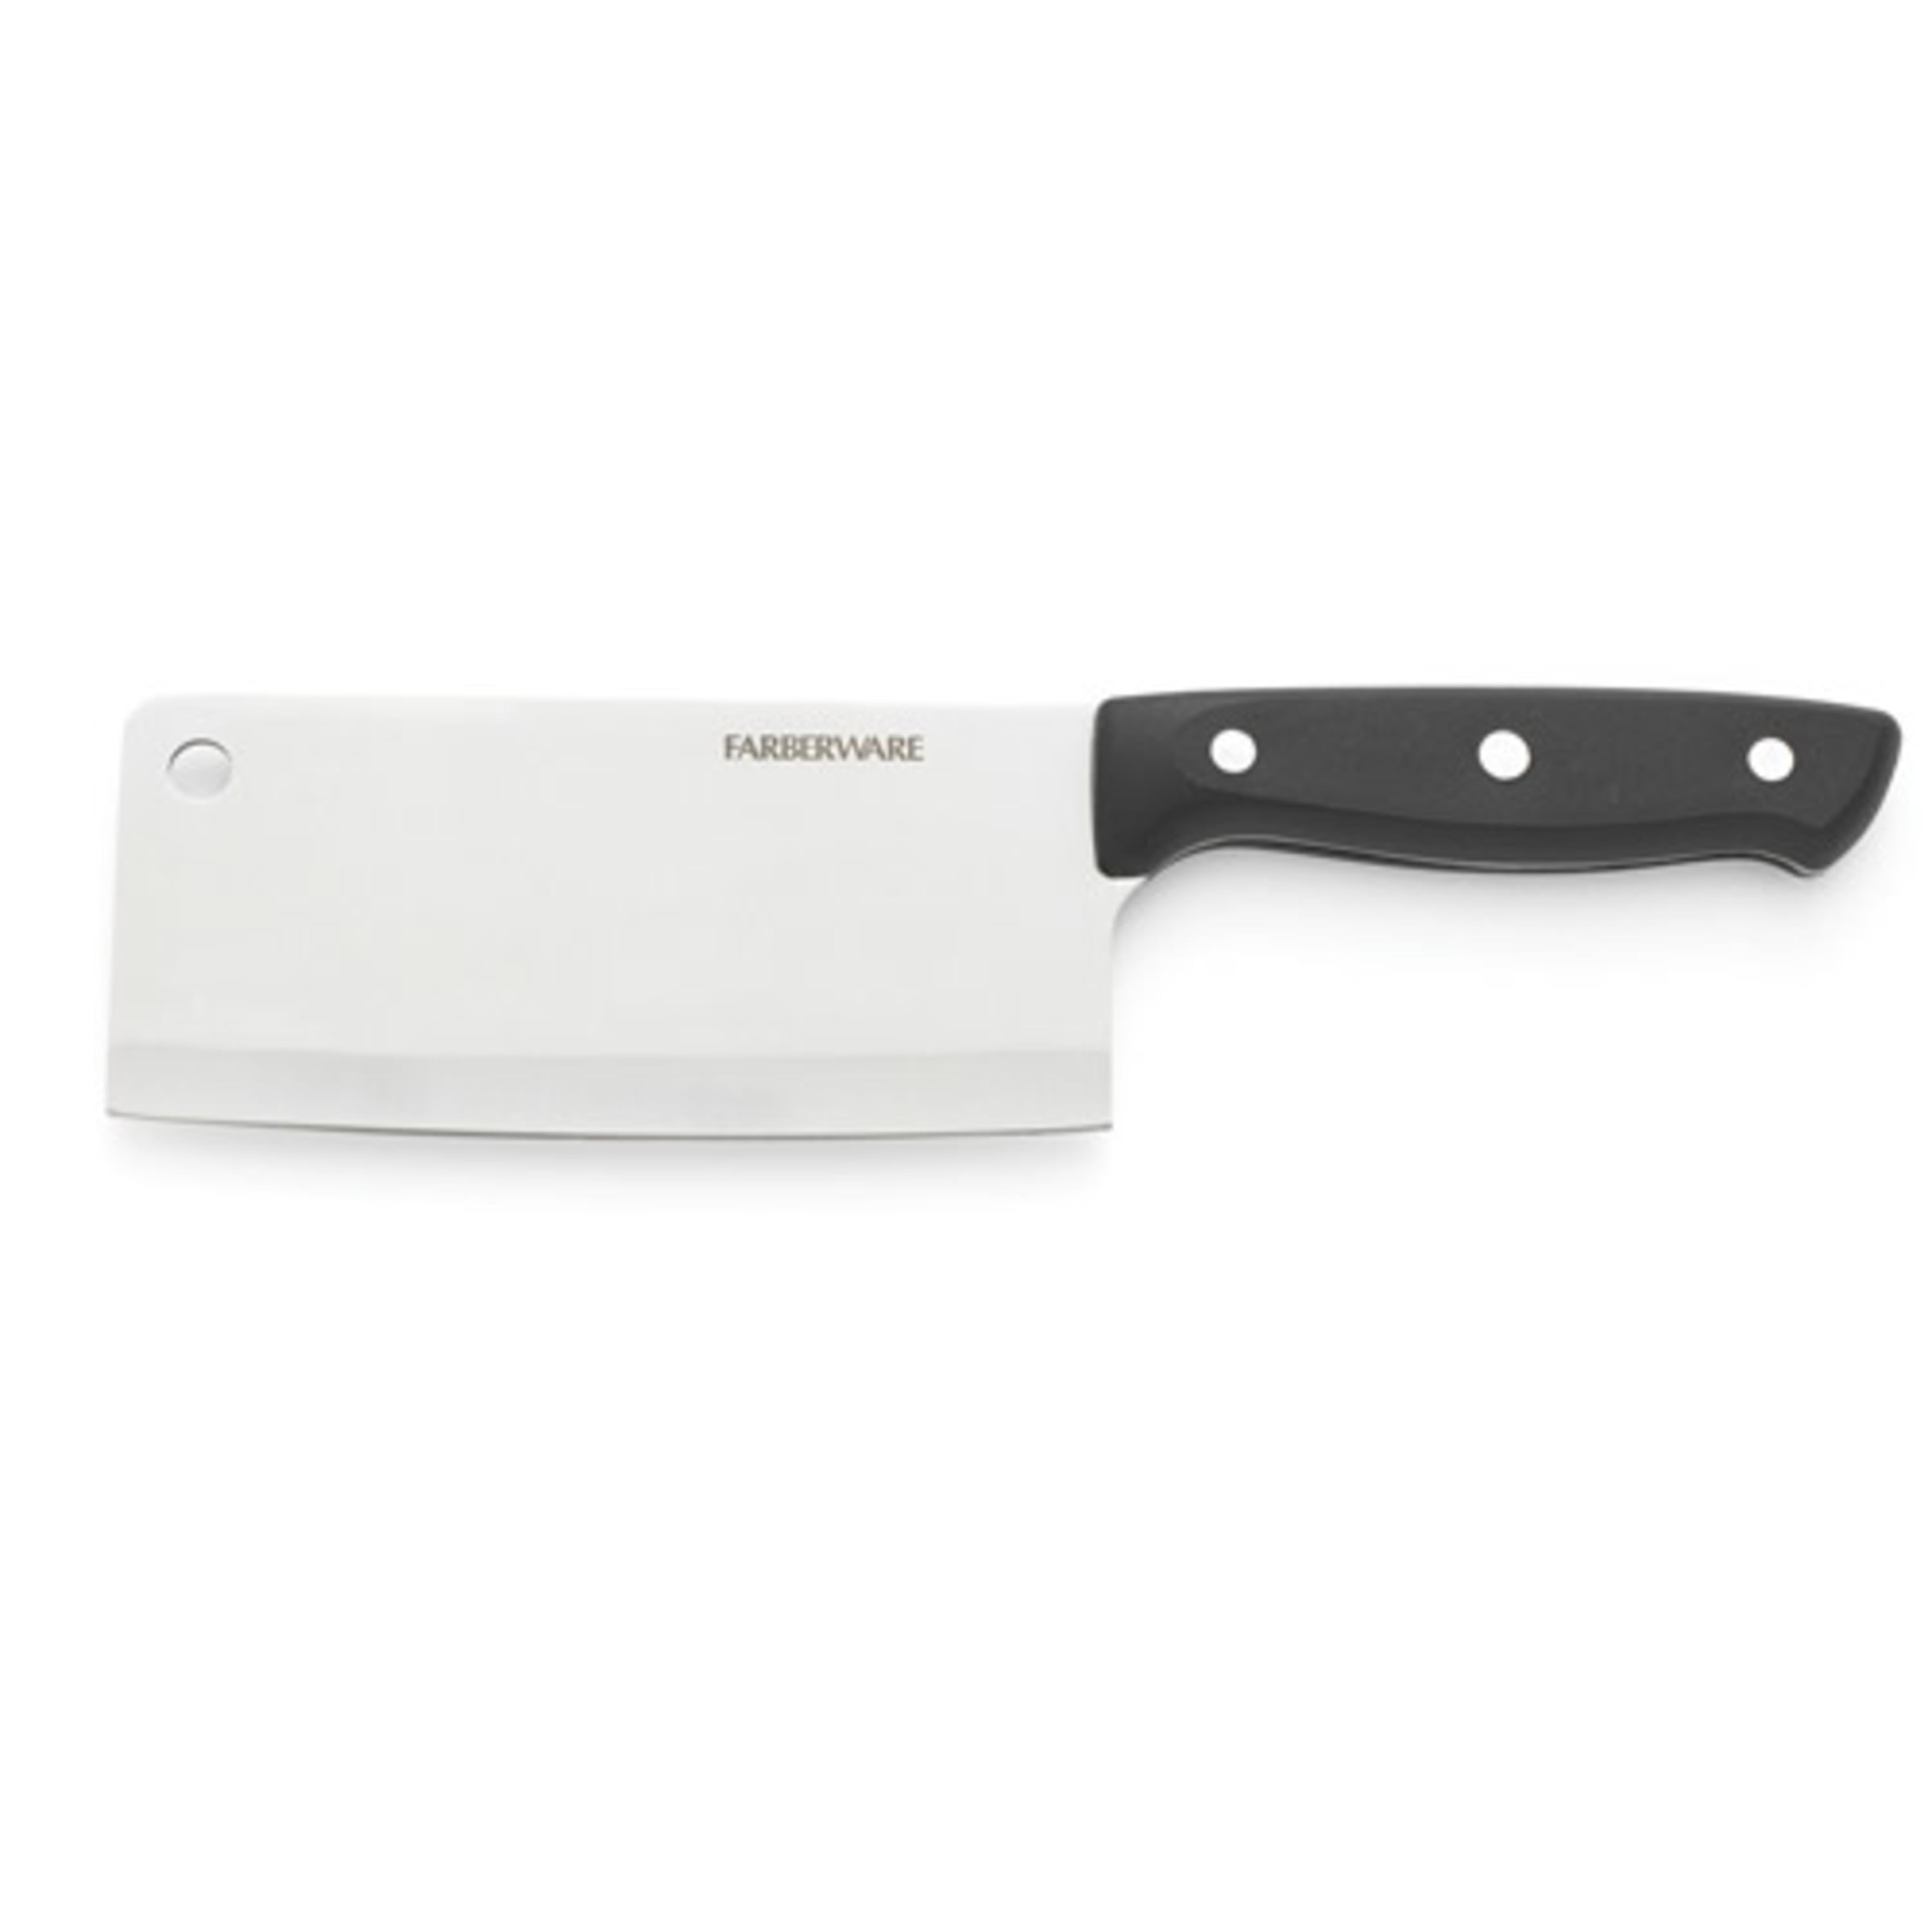  Huusk Chef Knives, Black Meat Cleaver Outdoor Cooking Knife  with Sheath Camping Knives BBQ Knife set: Home & Kitchen